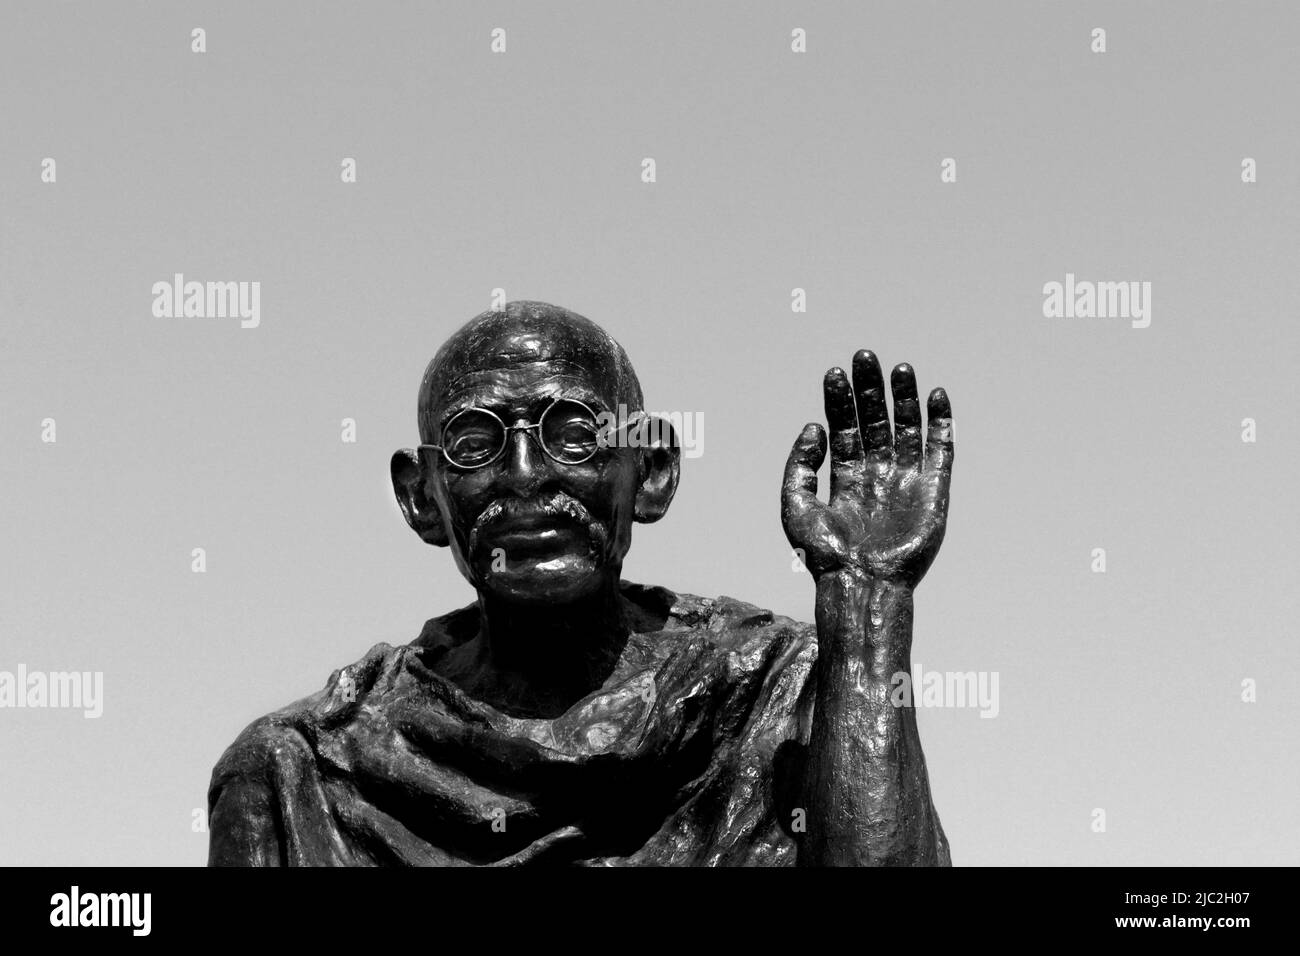 A bronze statue of Indian leader Mahatma Gandhi erected in 1988 along the eastern waterfront in San Fancisco, California Stock Photo